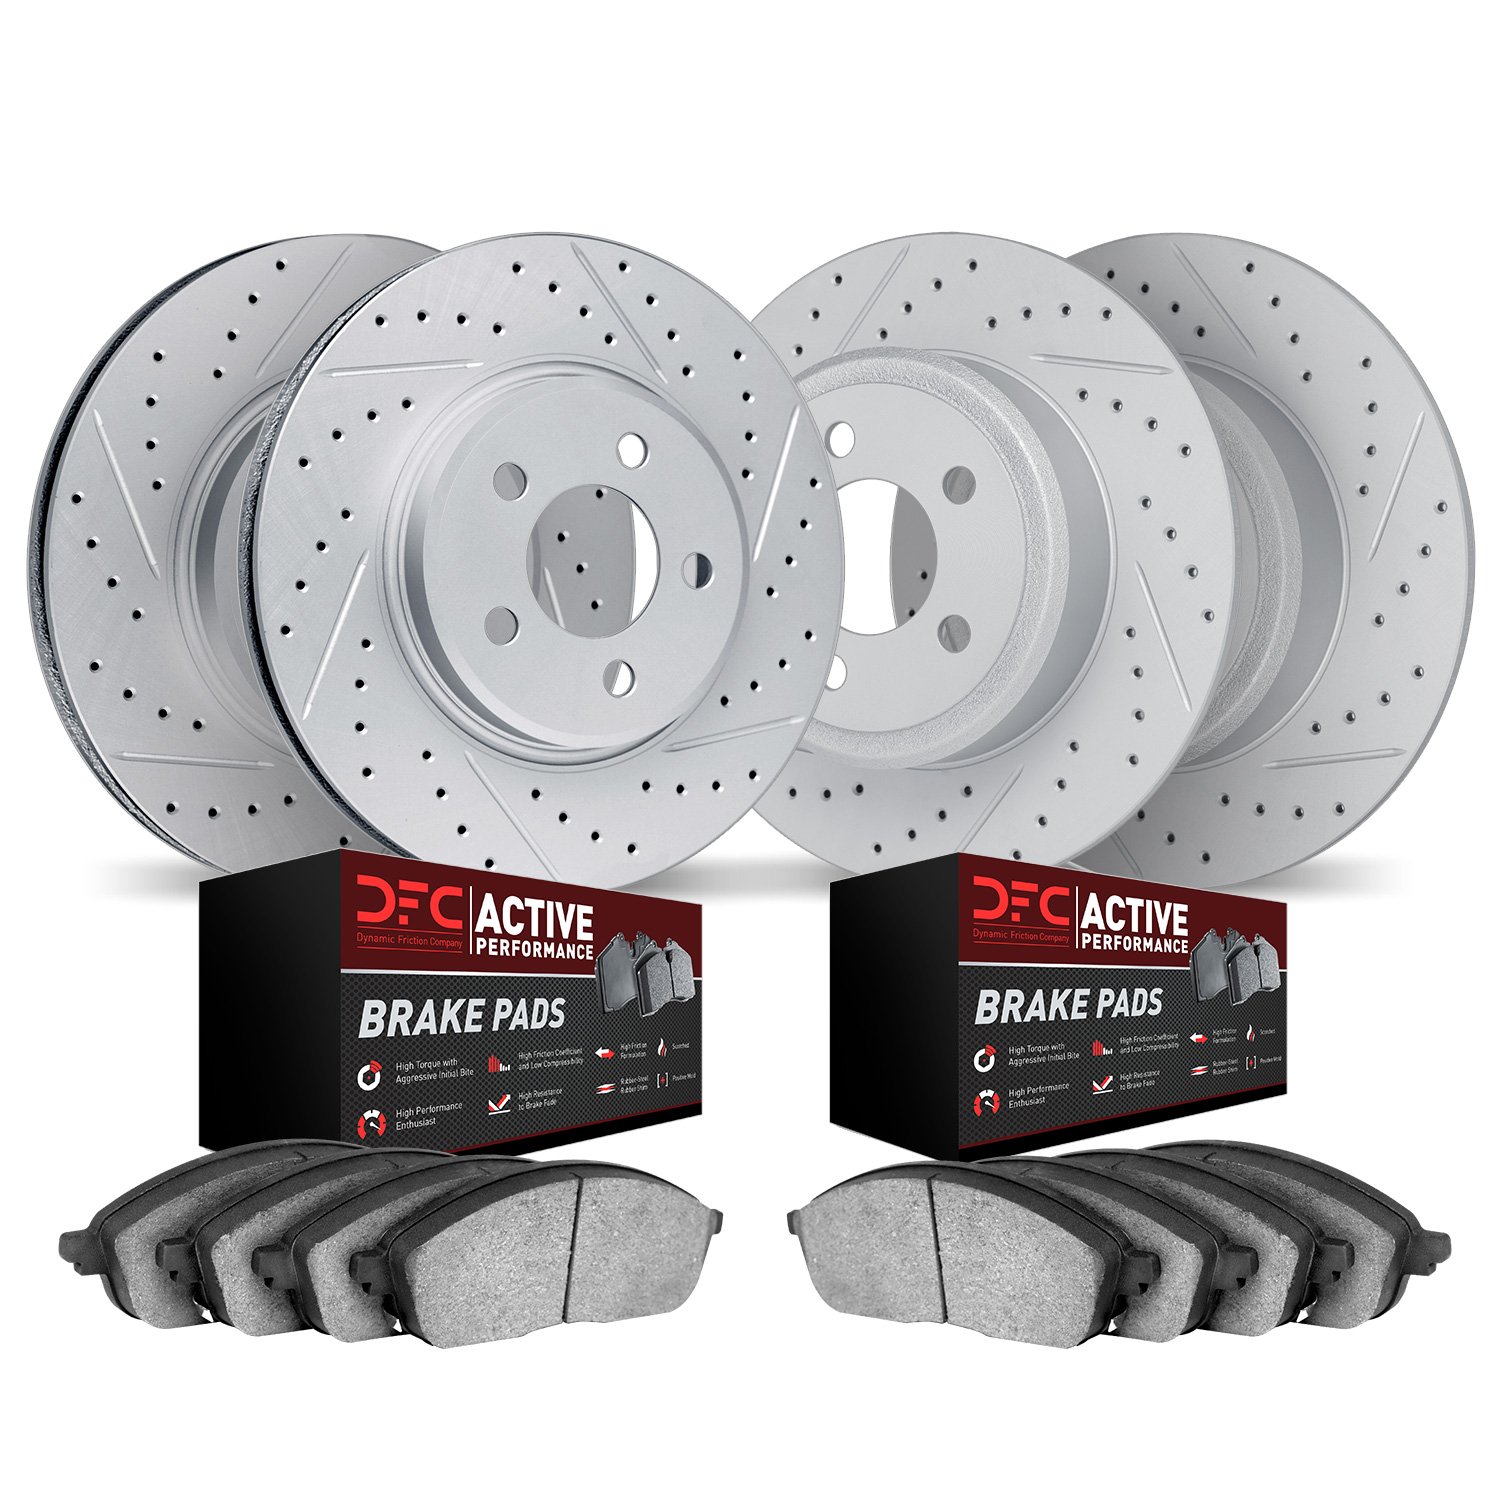 2704-13000 Geoperformance Drilled/Slotted Brake Rotors with Active Performance Pads Kit, 1998-2002 Subaru, Position: Front and R